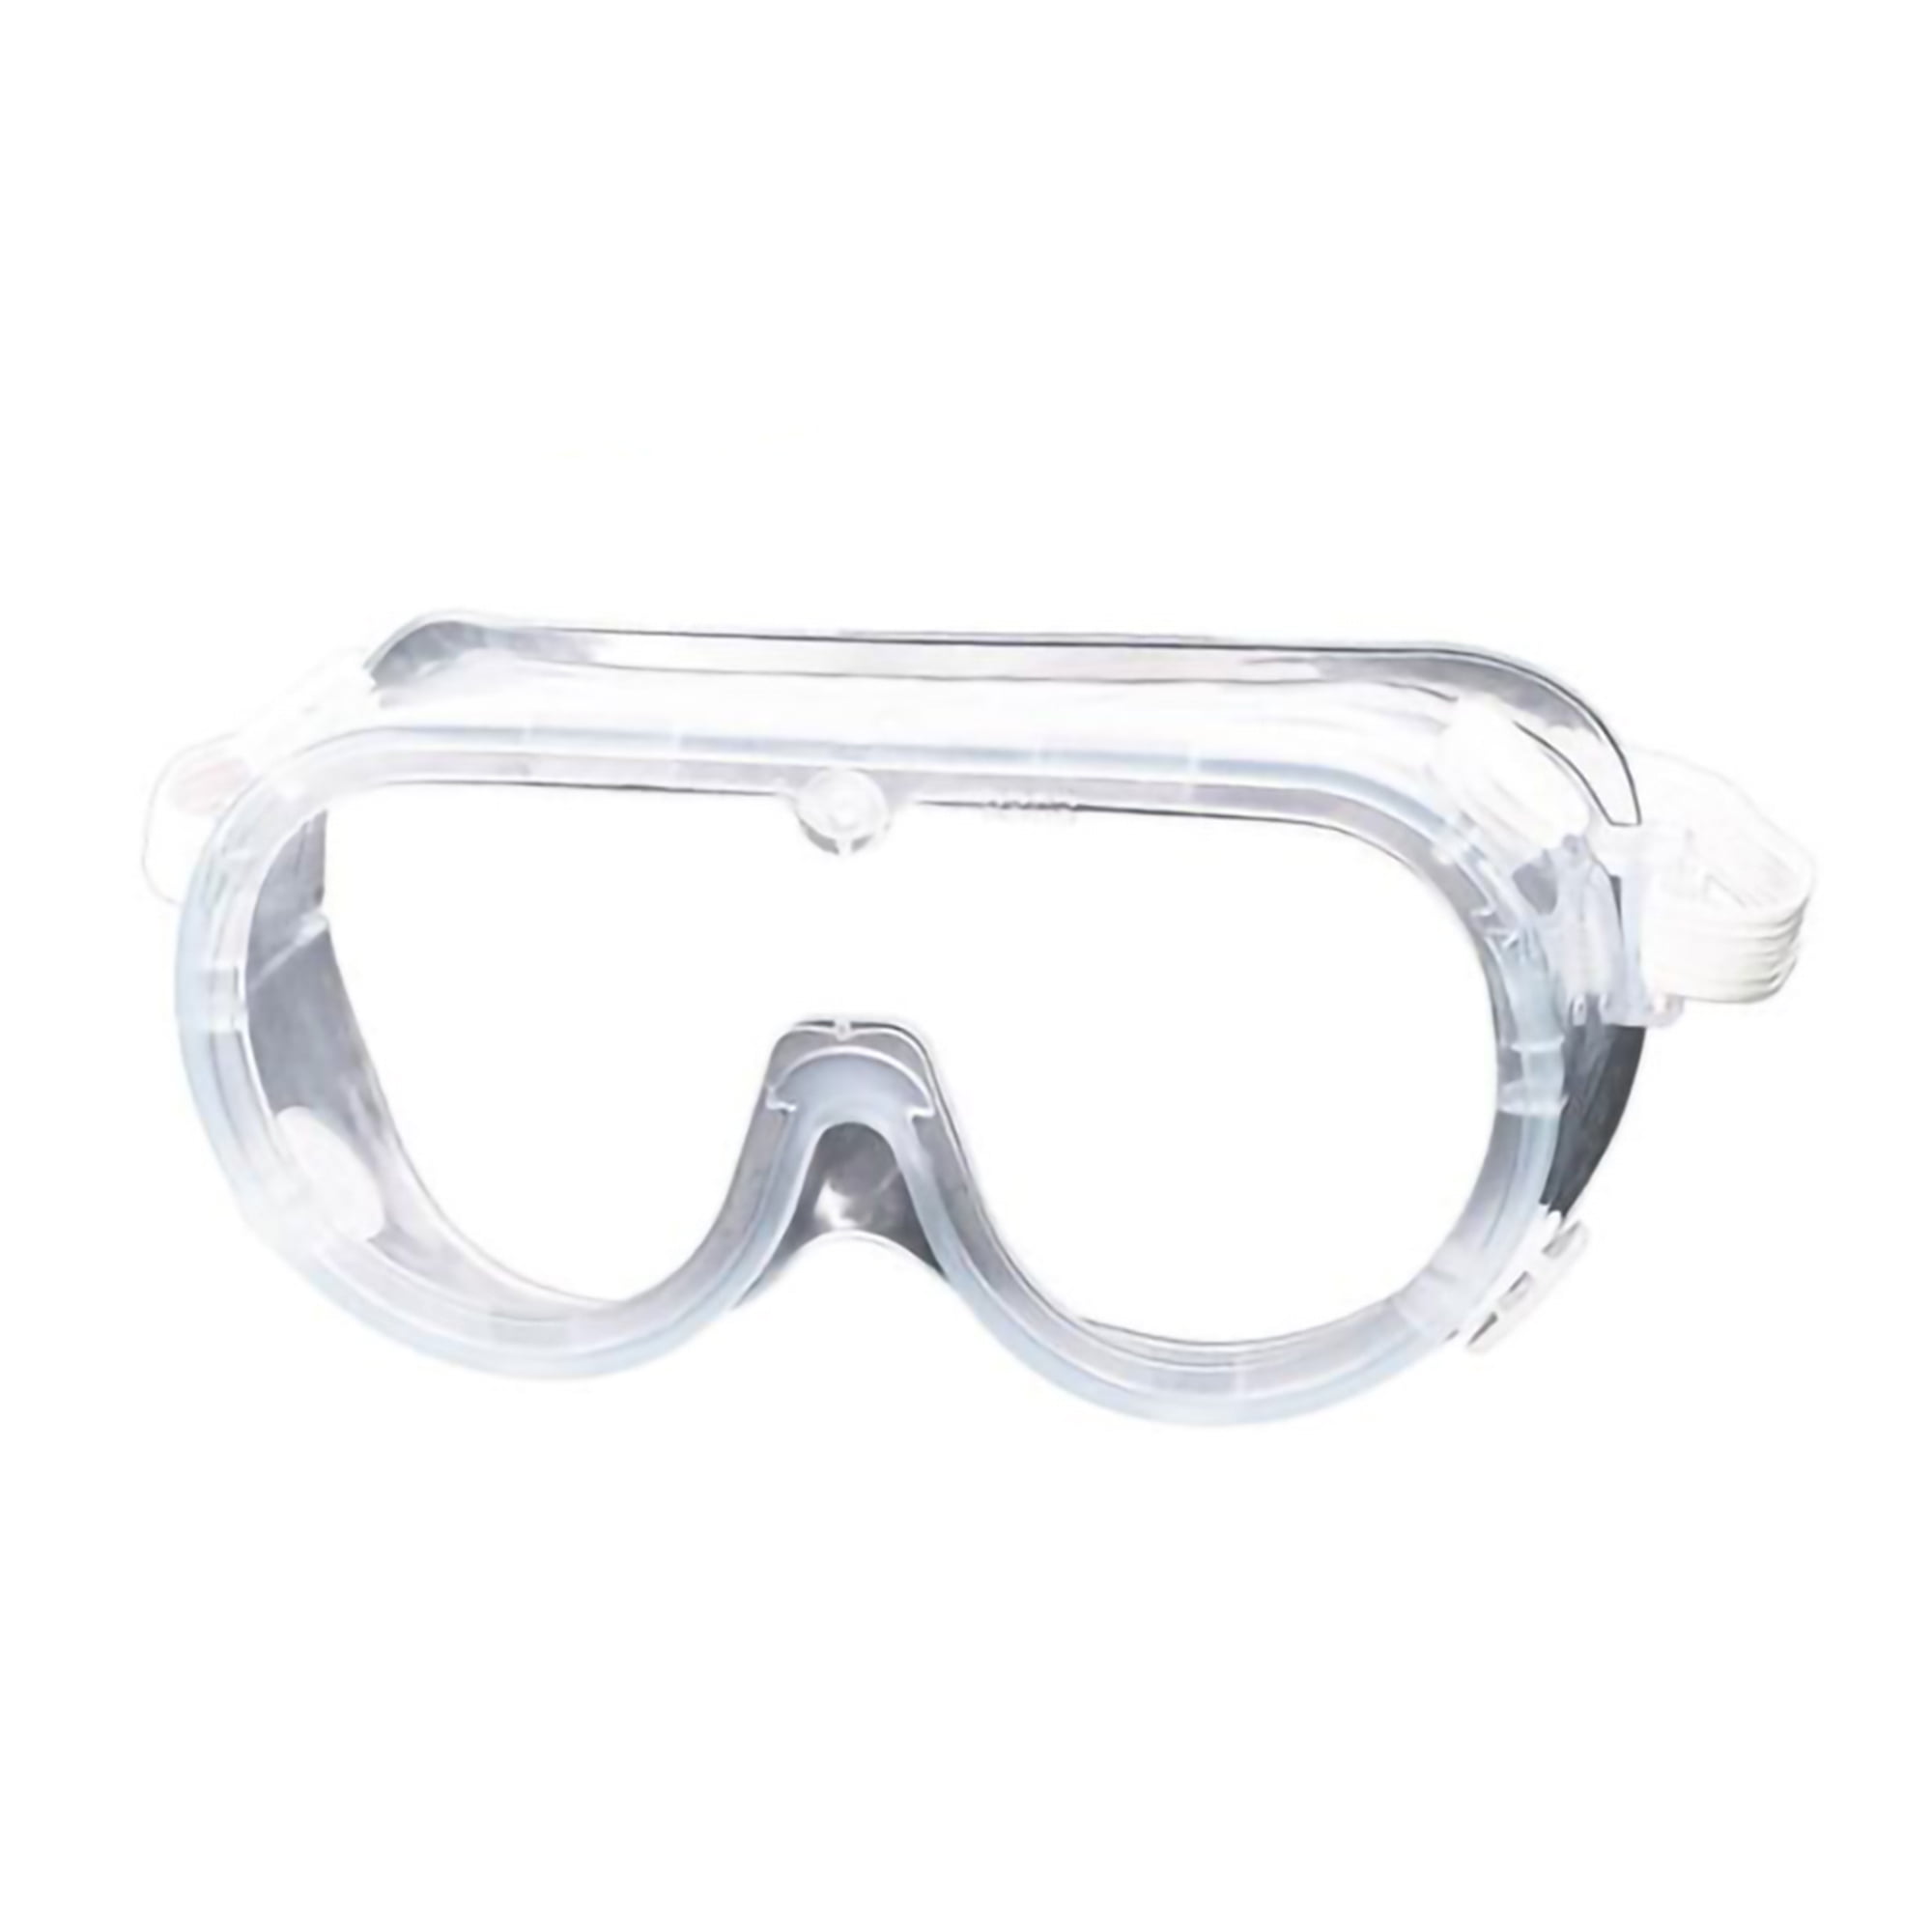 Details about   2X Clear Anti Safety Goggles Glasses Eye Protection Work Lab Dust Clear Lens 